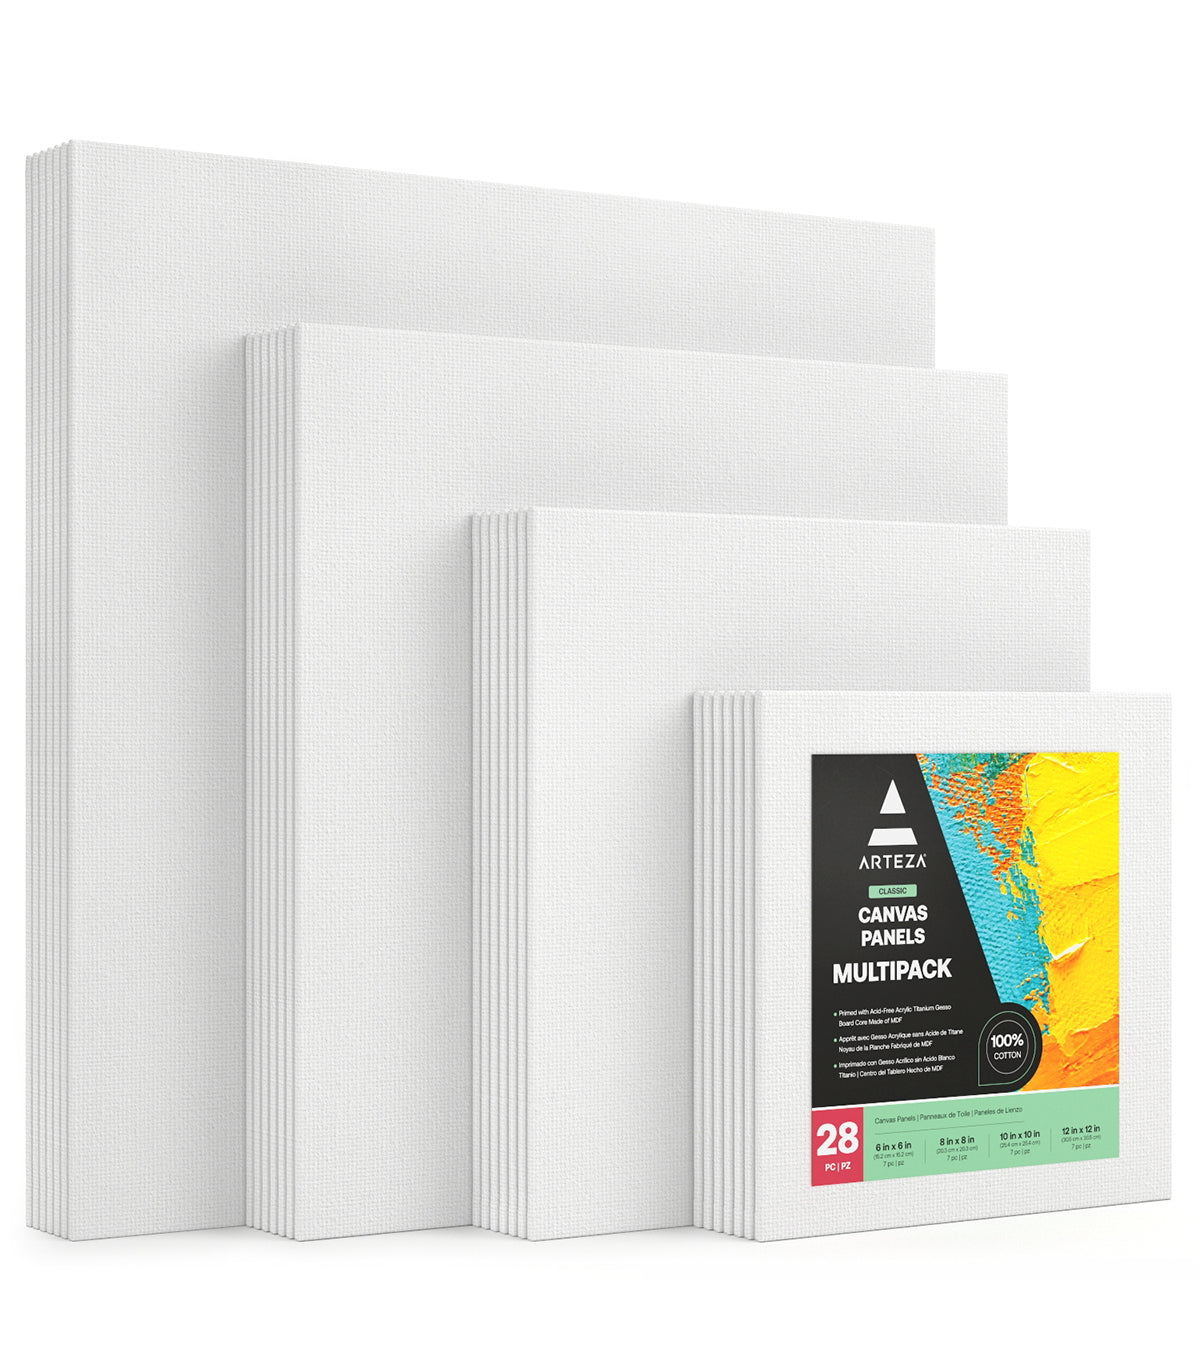 Mixed Shape Canvases, Multipack - Set of 10 –